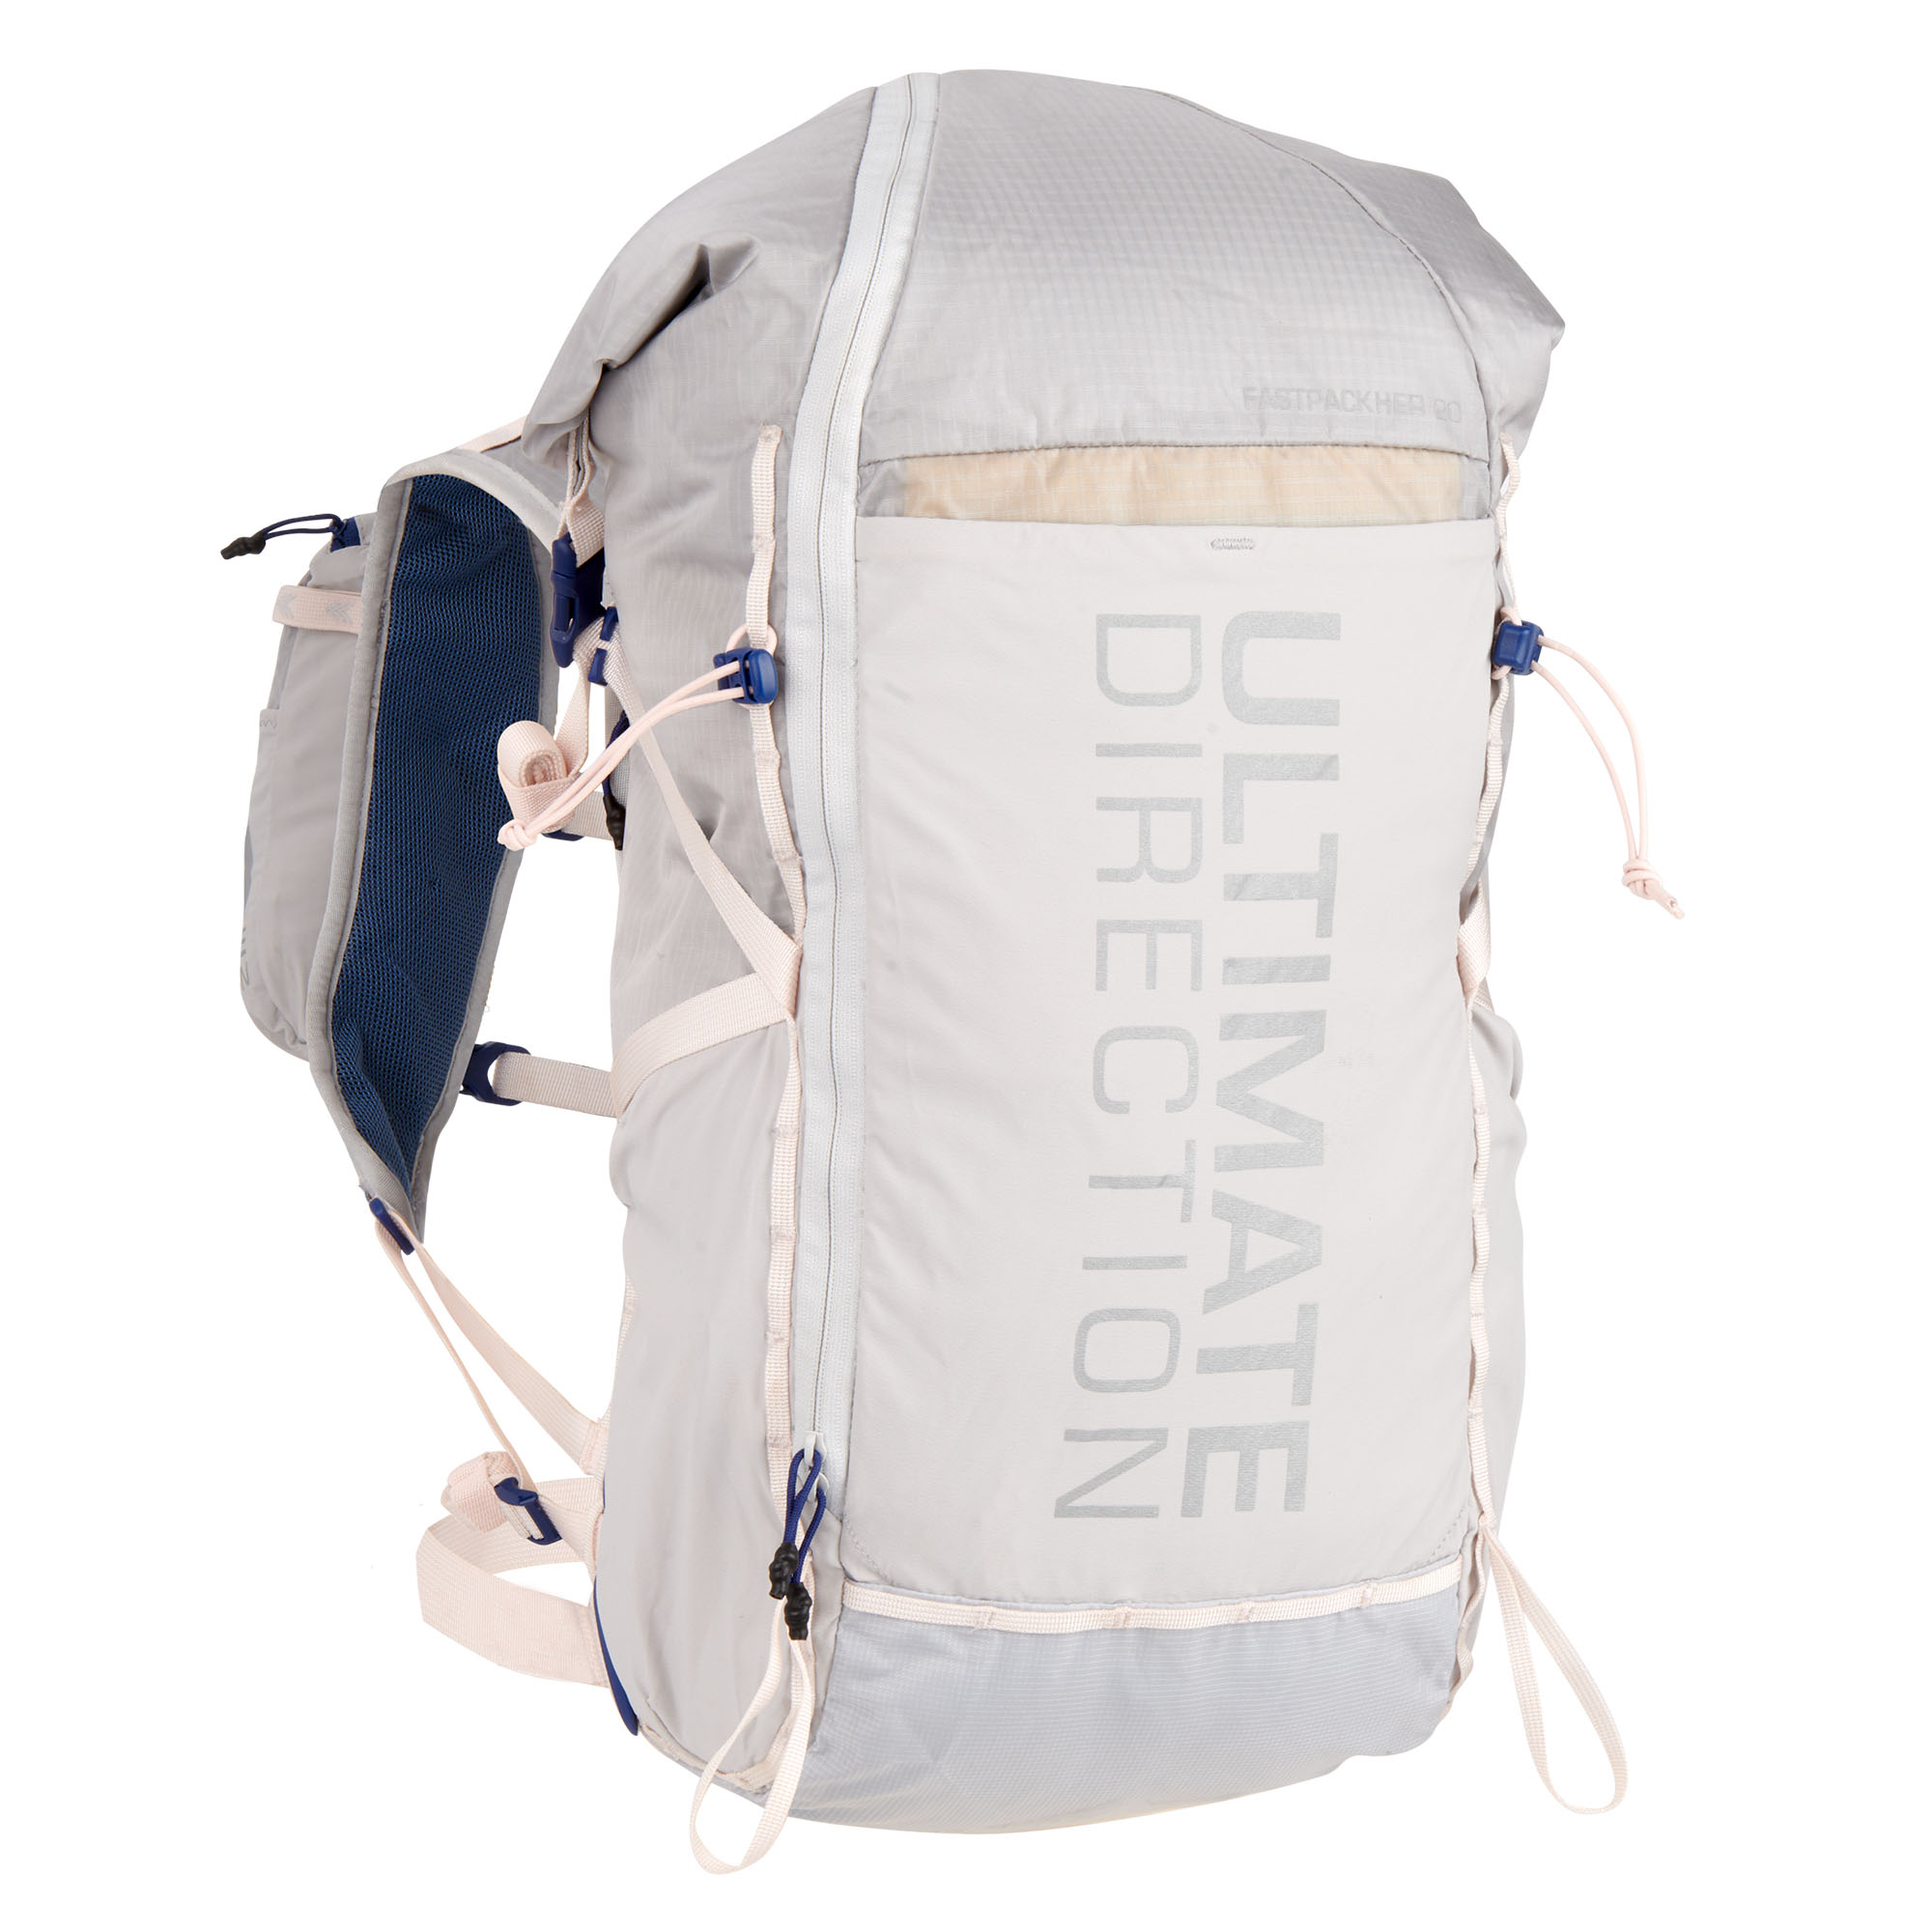 Ultimate Direction FastpackHer 20 in Mist Size XS